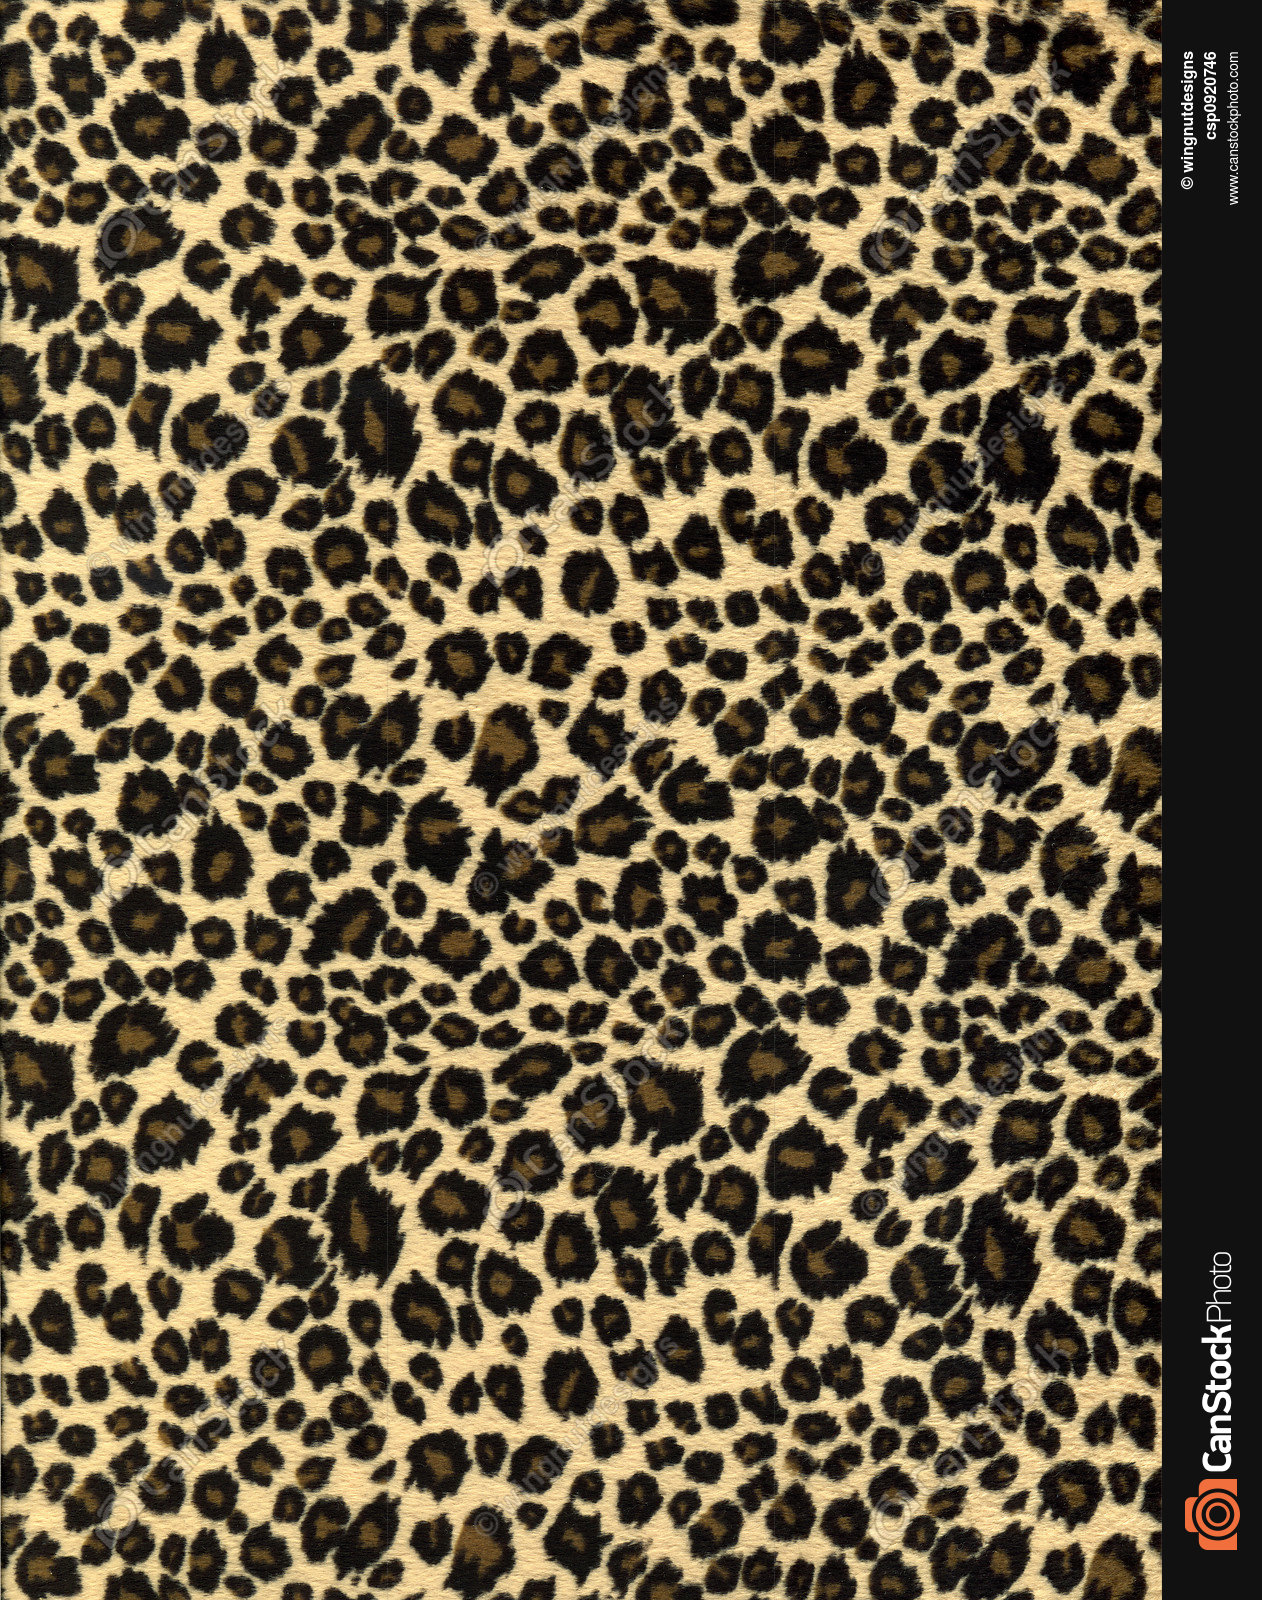 Leopard print fabric texture stock image - Search Photos and Photo ...